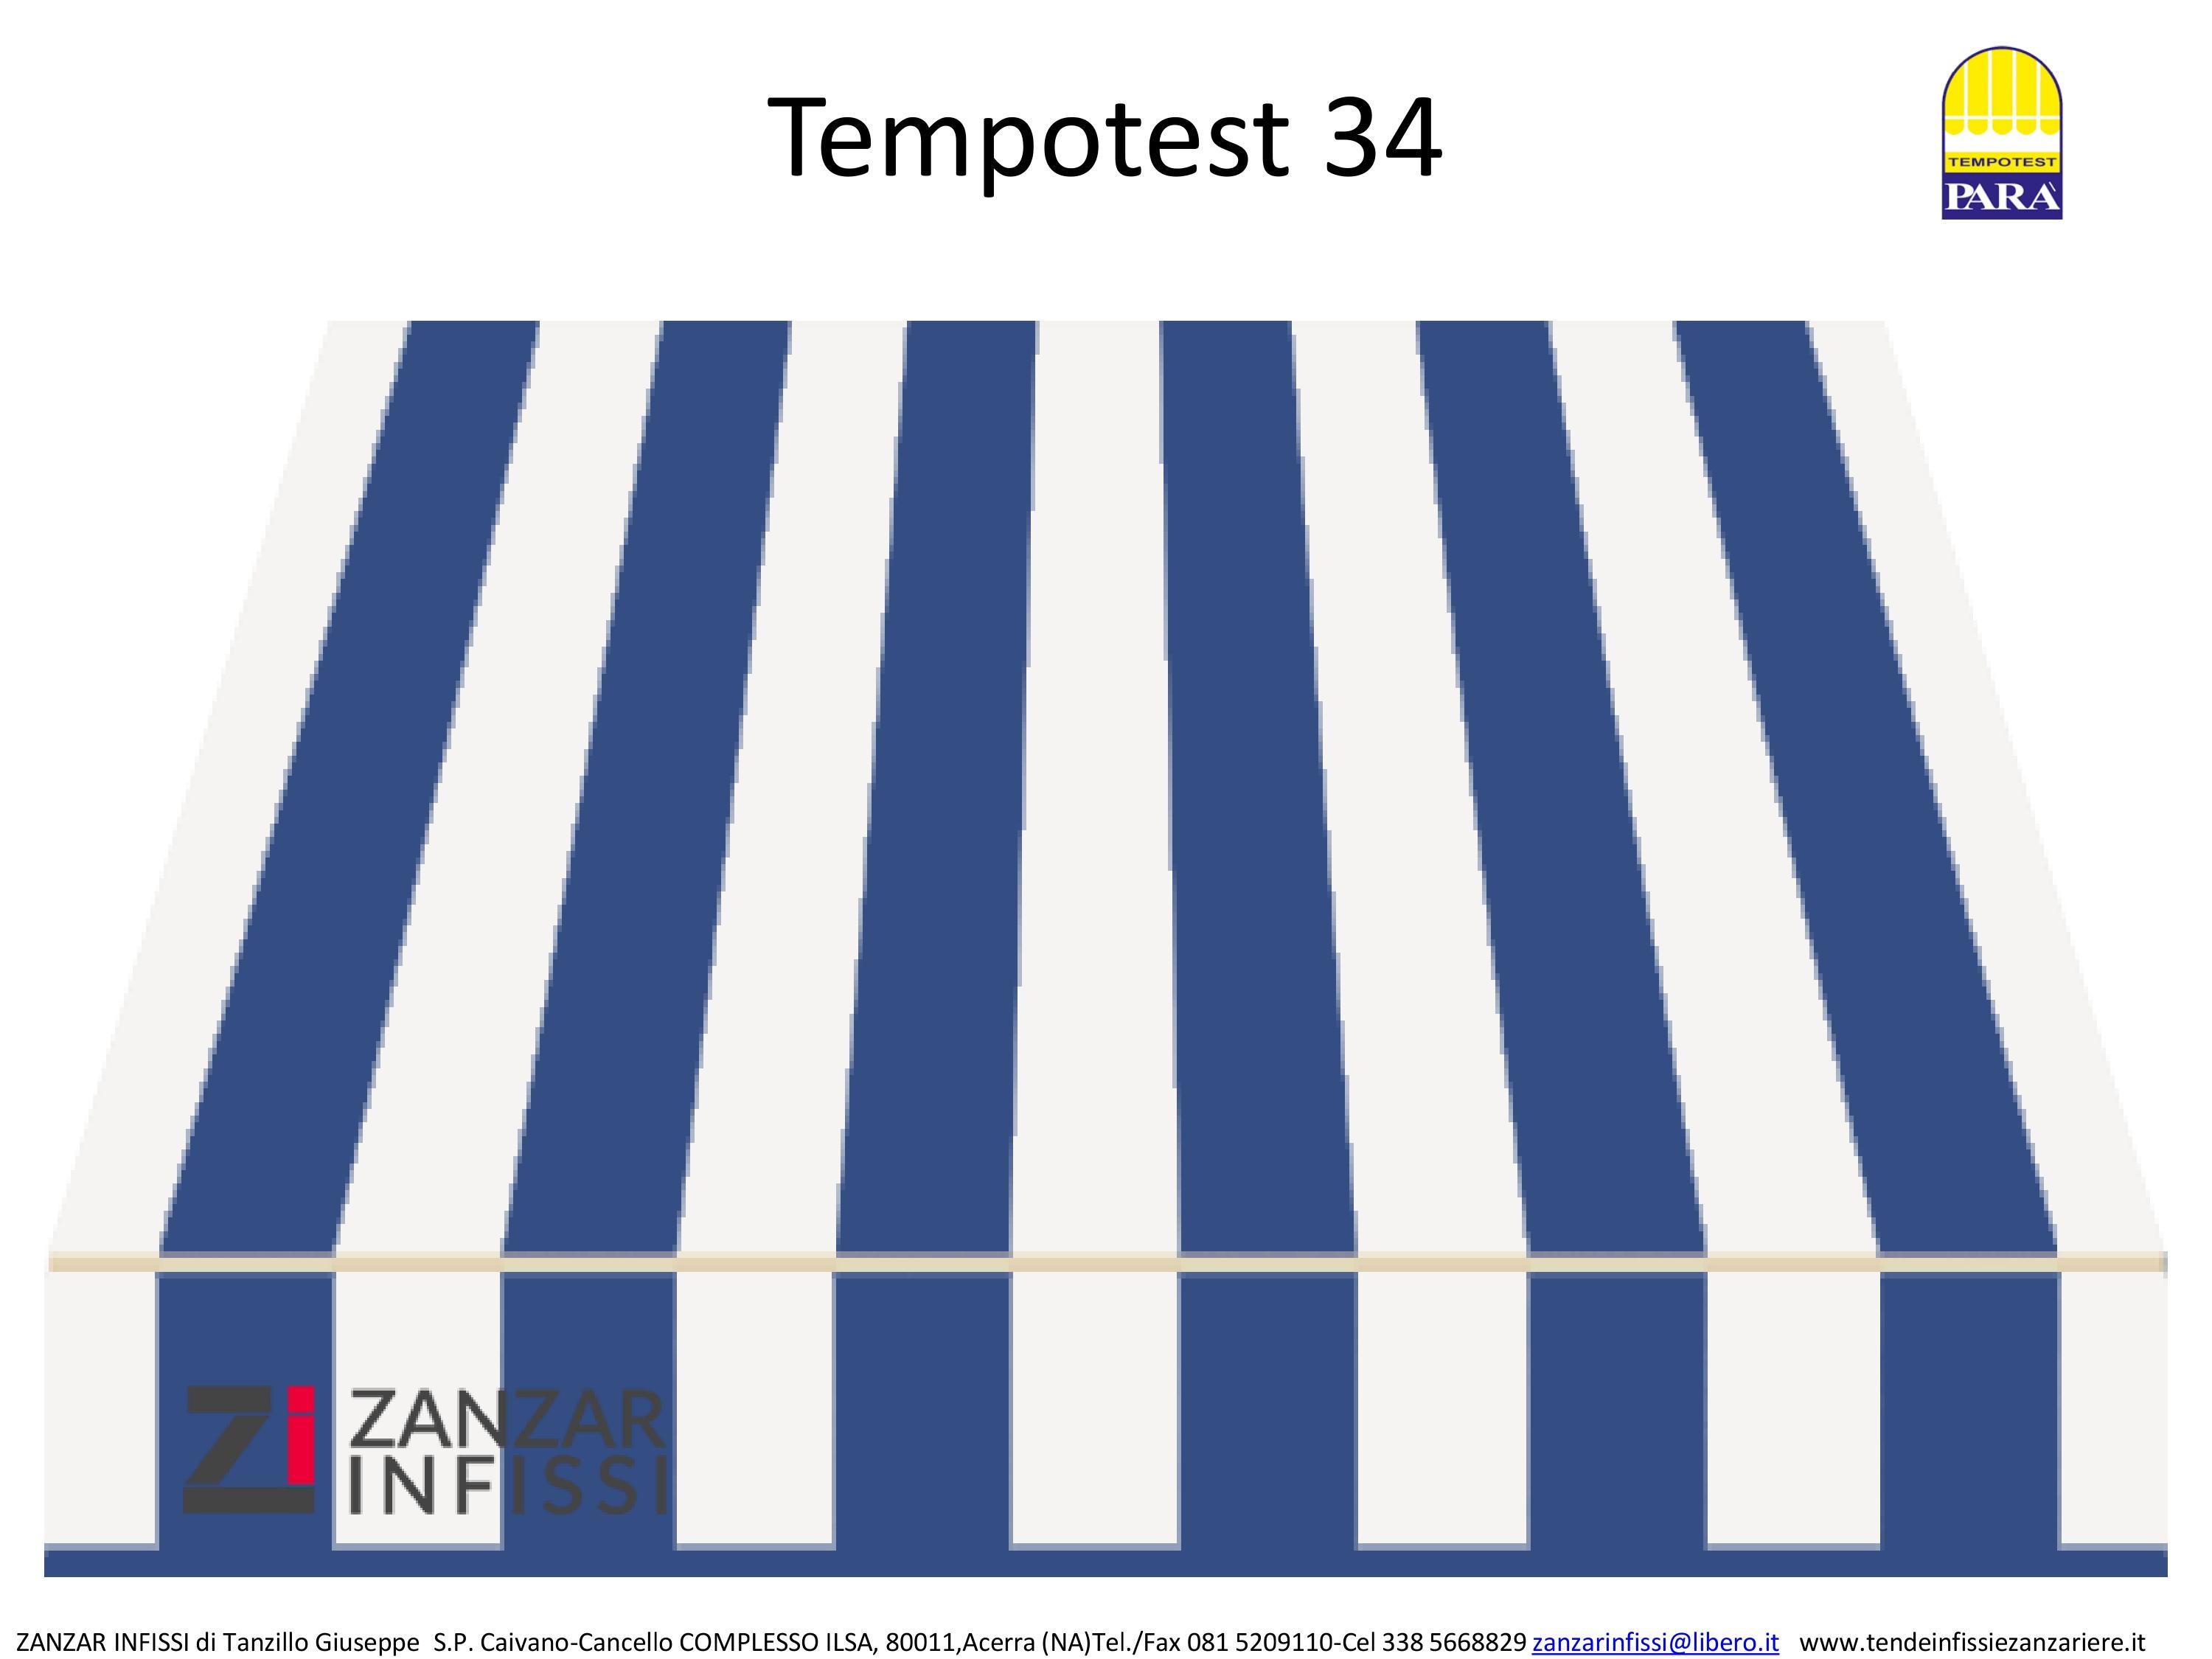 Tempotest 34